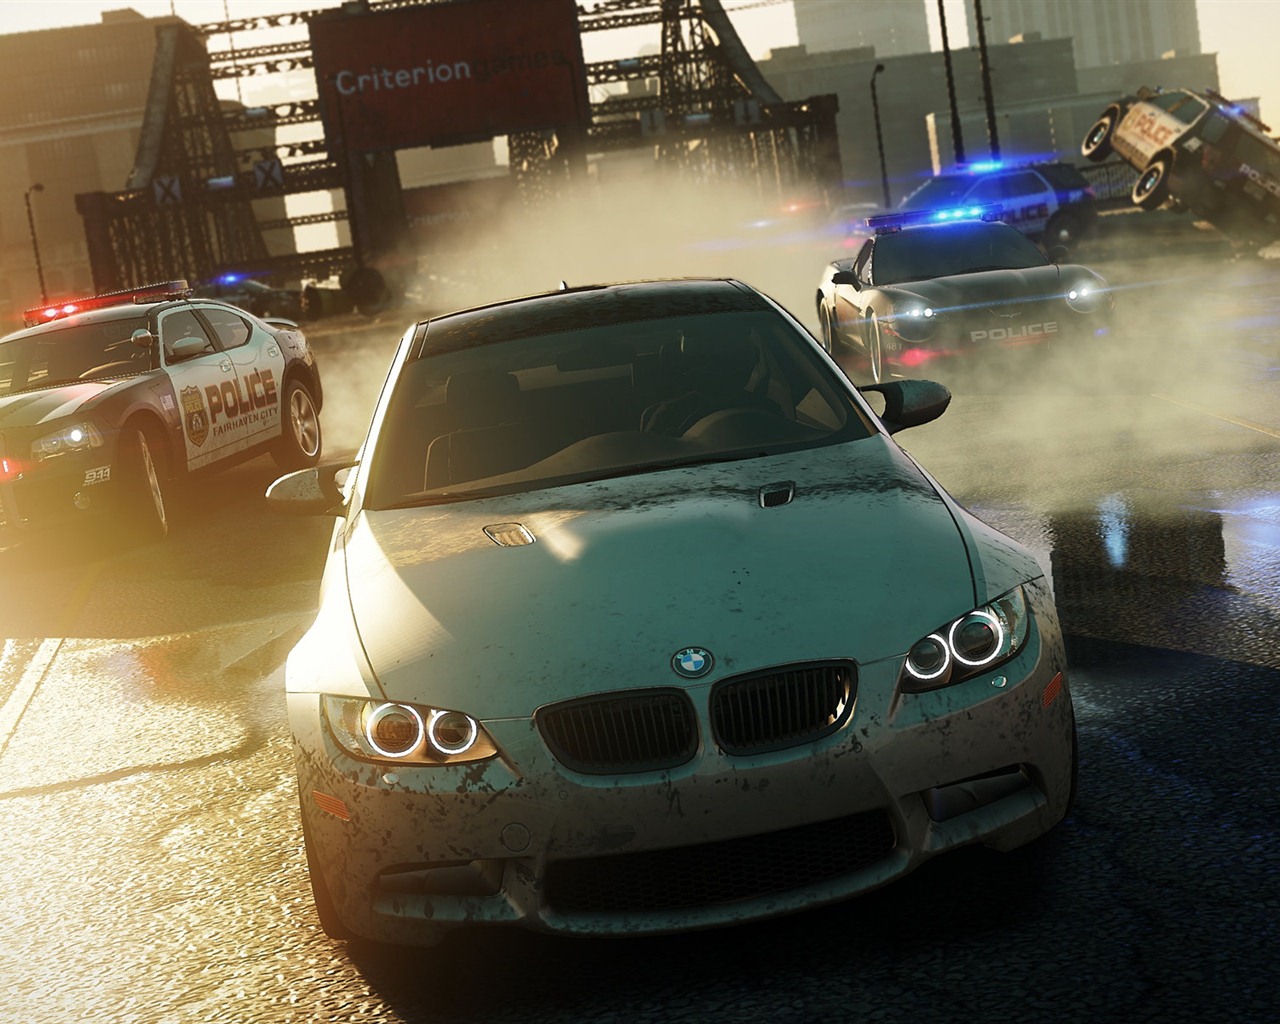 Need for Speed: Most Wanted 极品飞车17：最高通缉 高清壁纸19 - 1280x1024